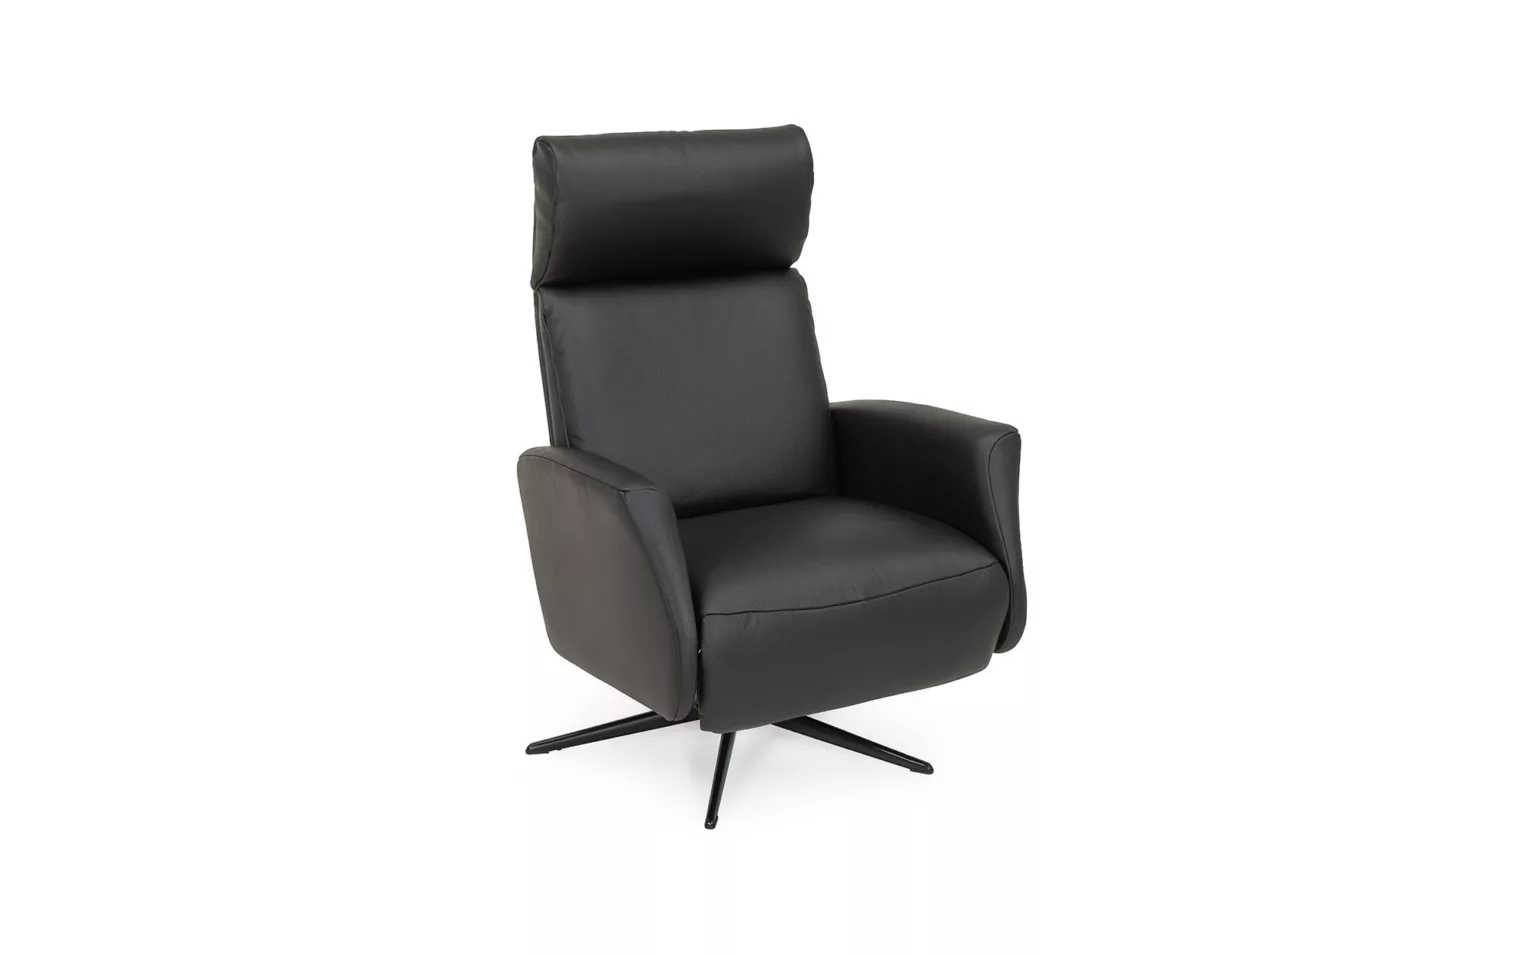 Comfy 8077 relaxfauteuil